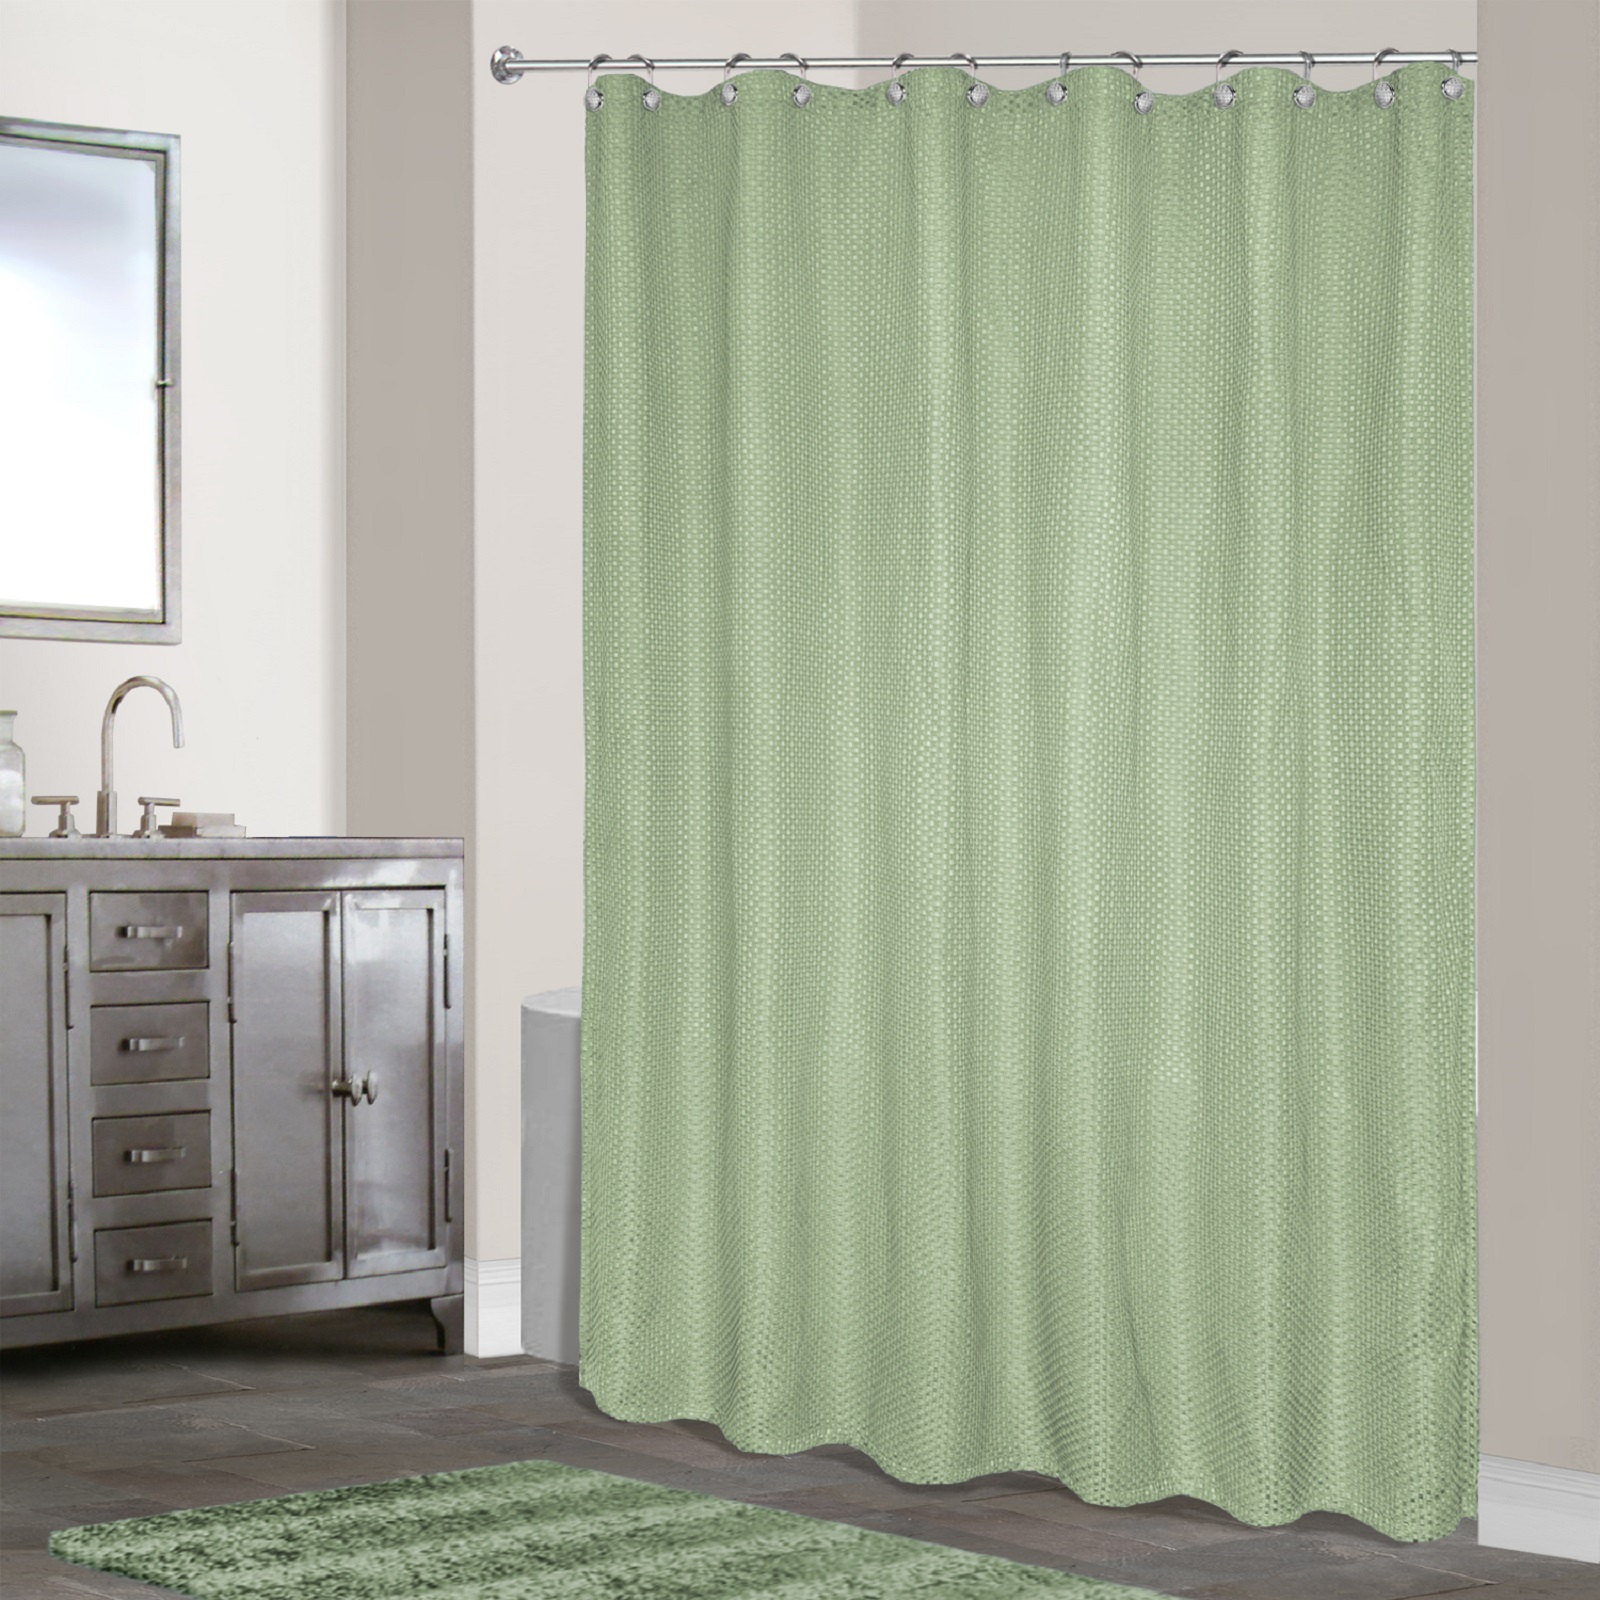 United Curtain Company "Hamden" - Solid Waffle Weave Woven Free Standing Shower Curtain